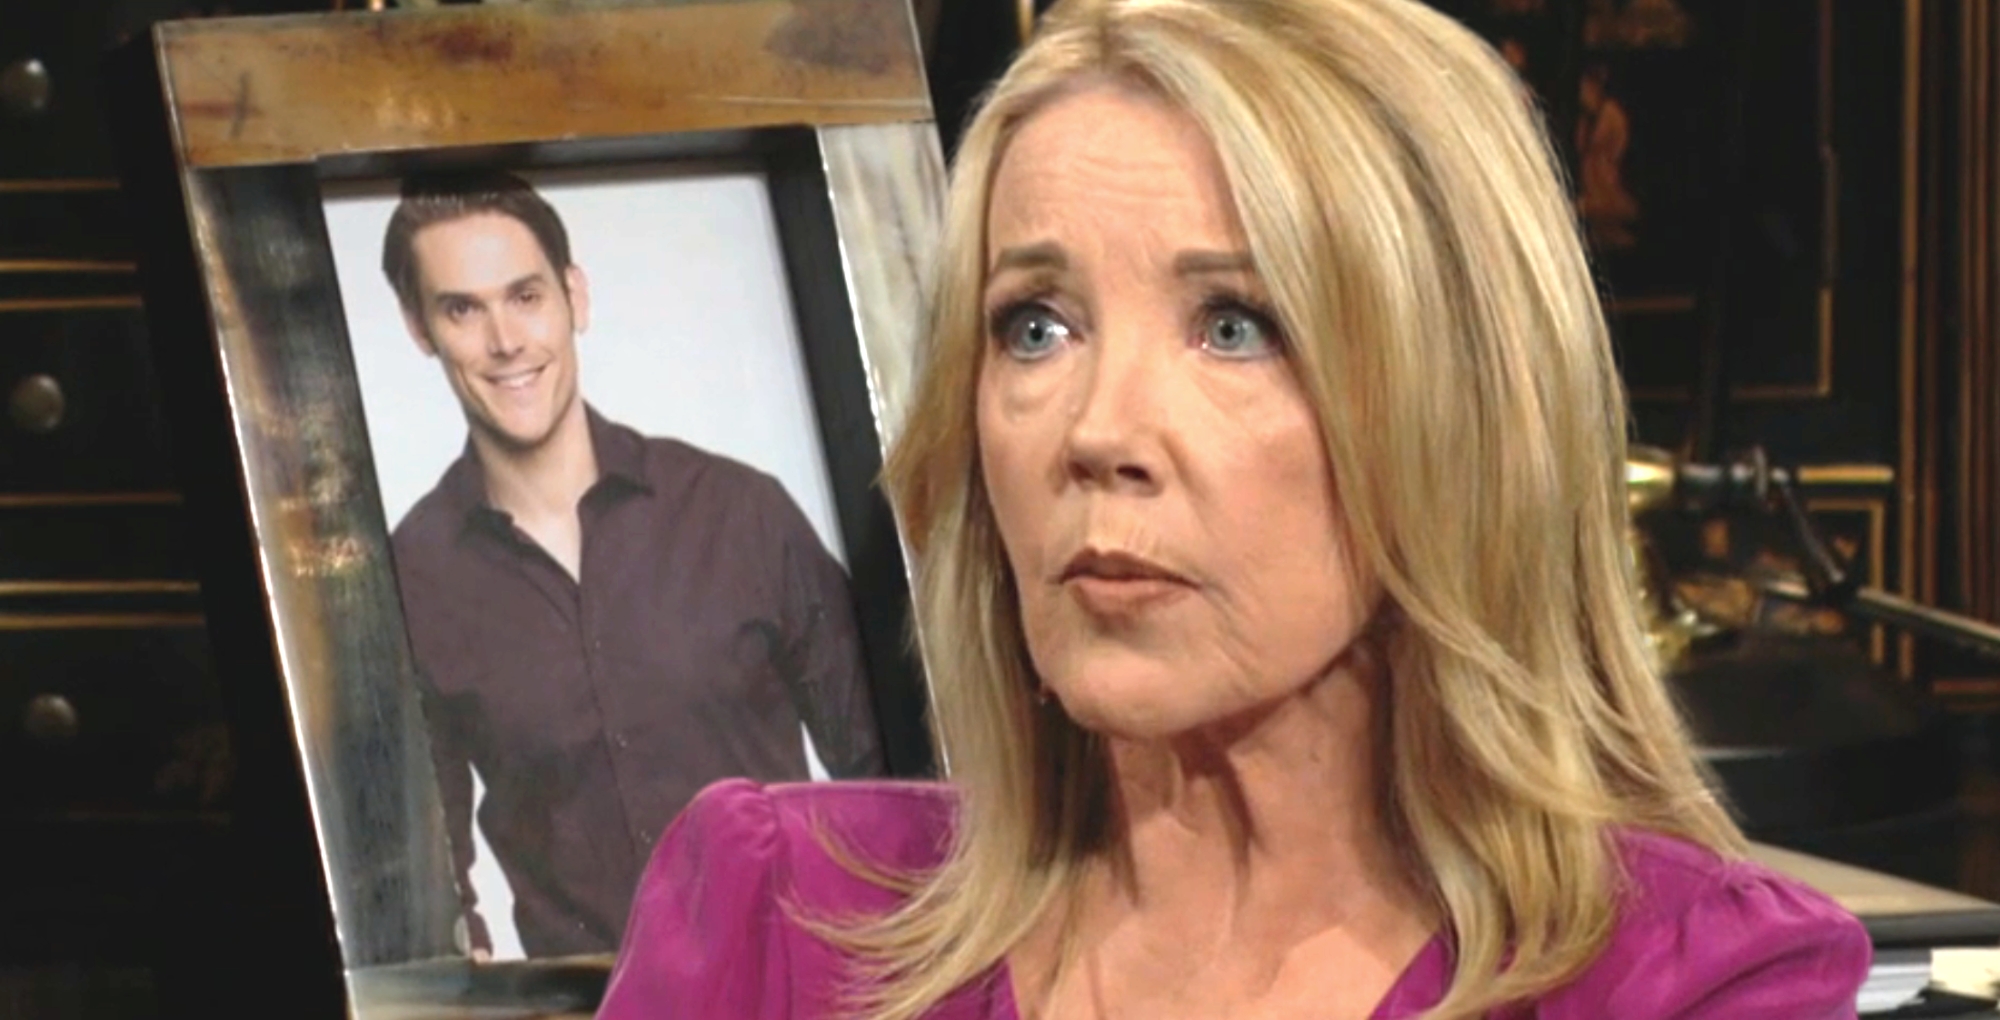 nikki newman and a photo of adam on young and the restless.